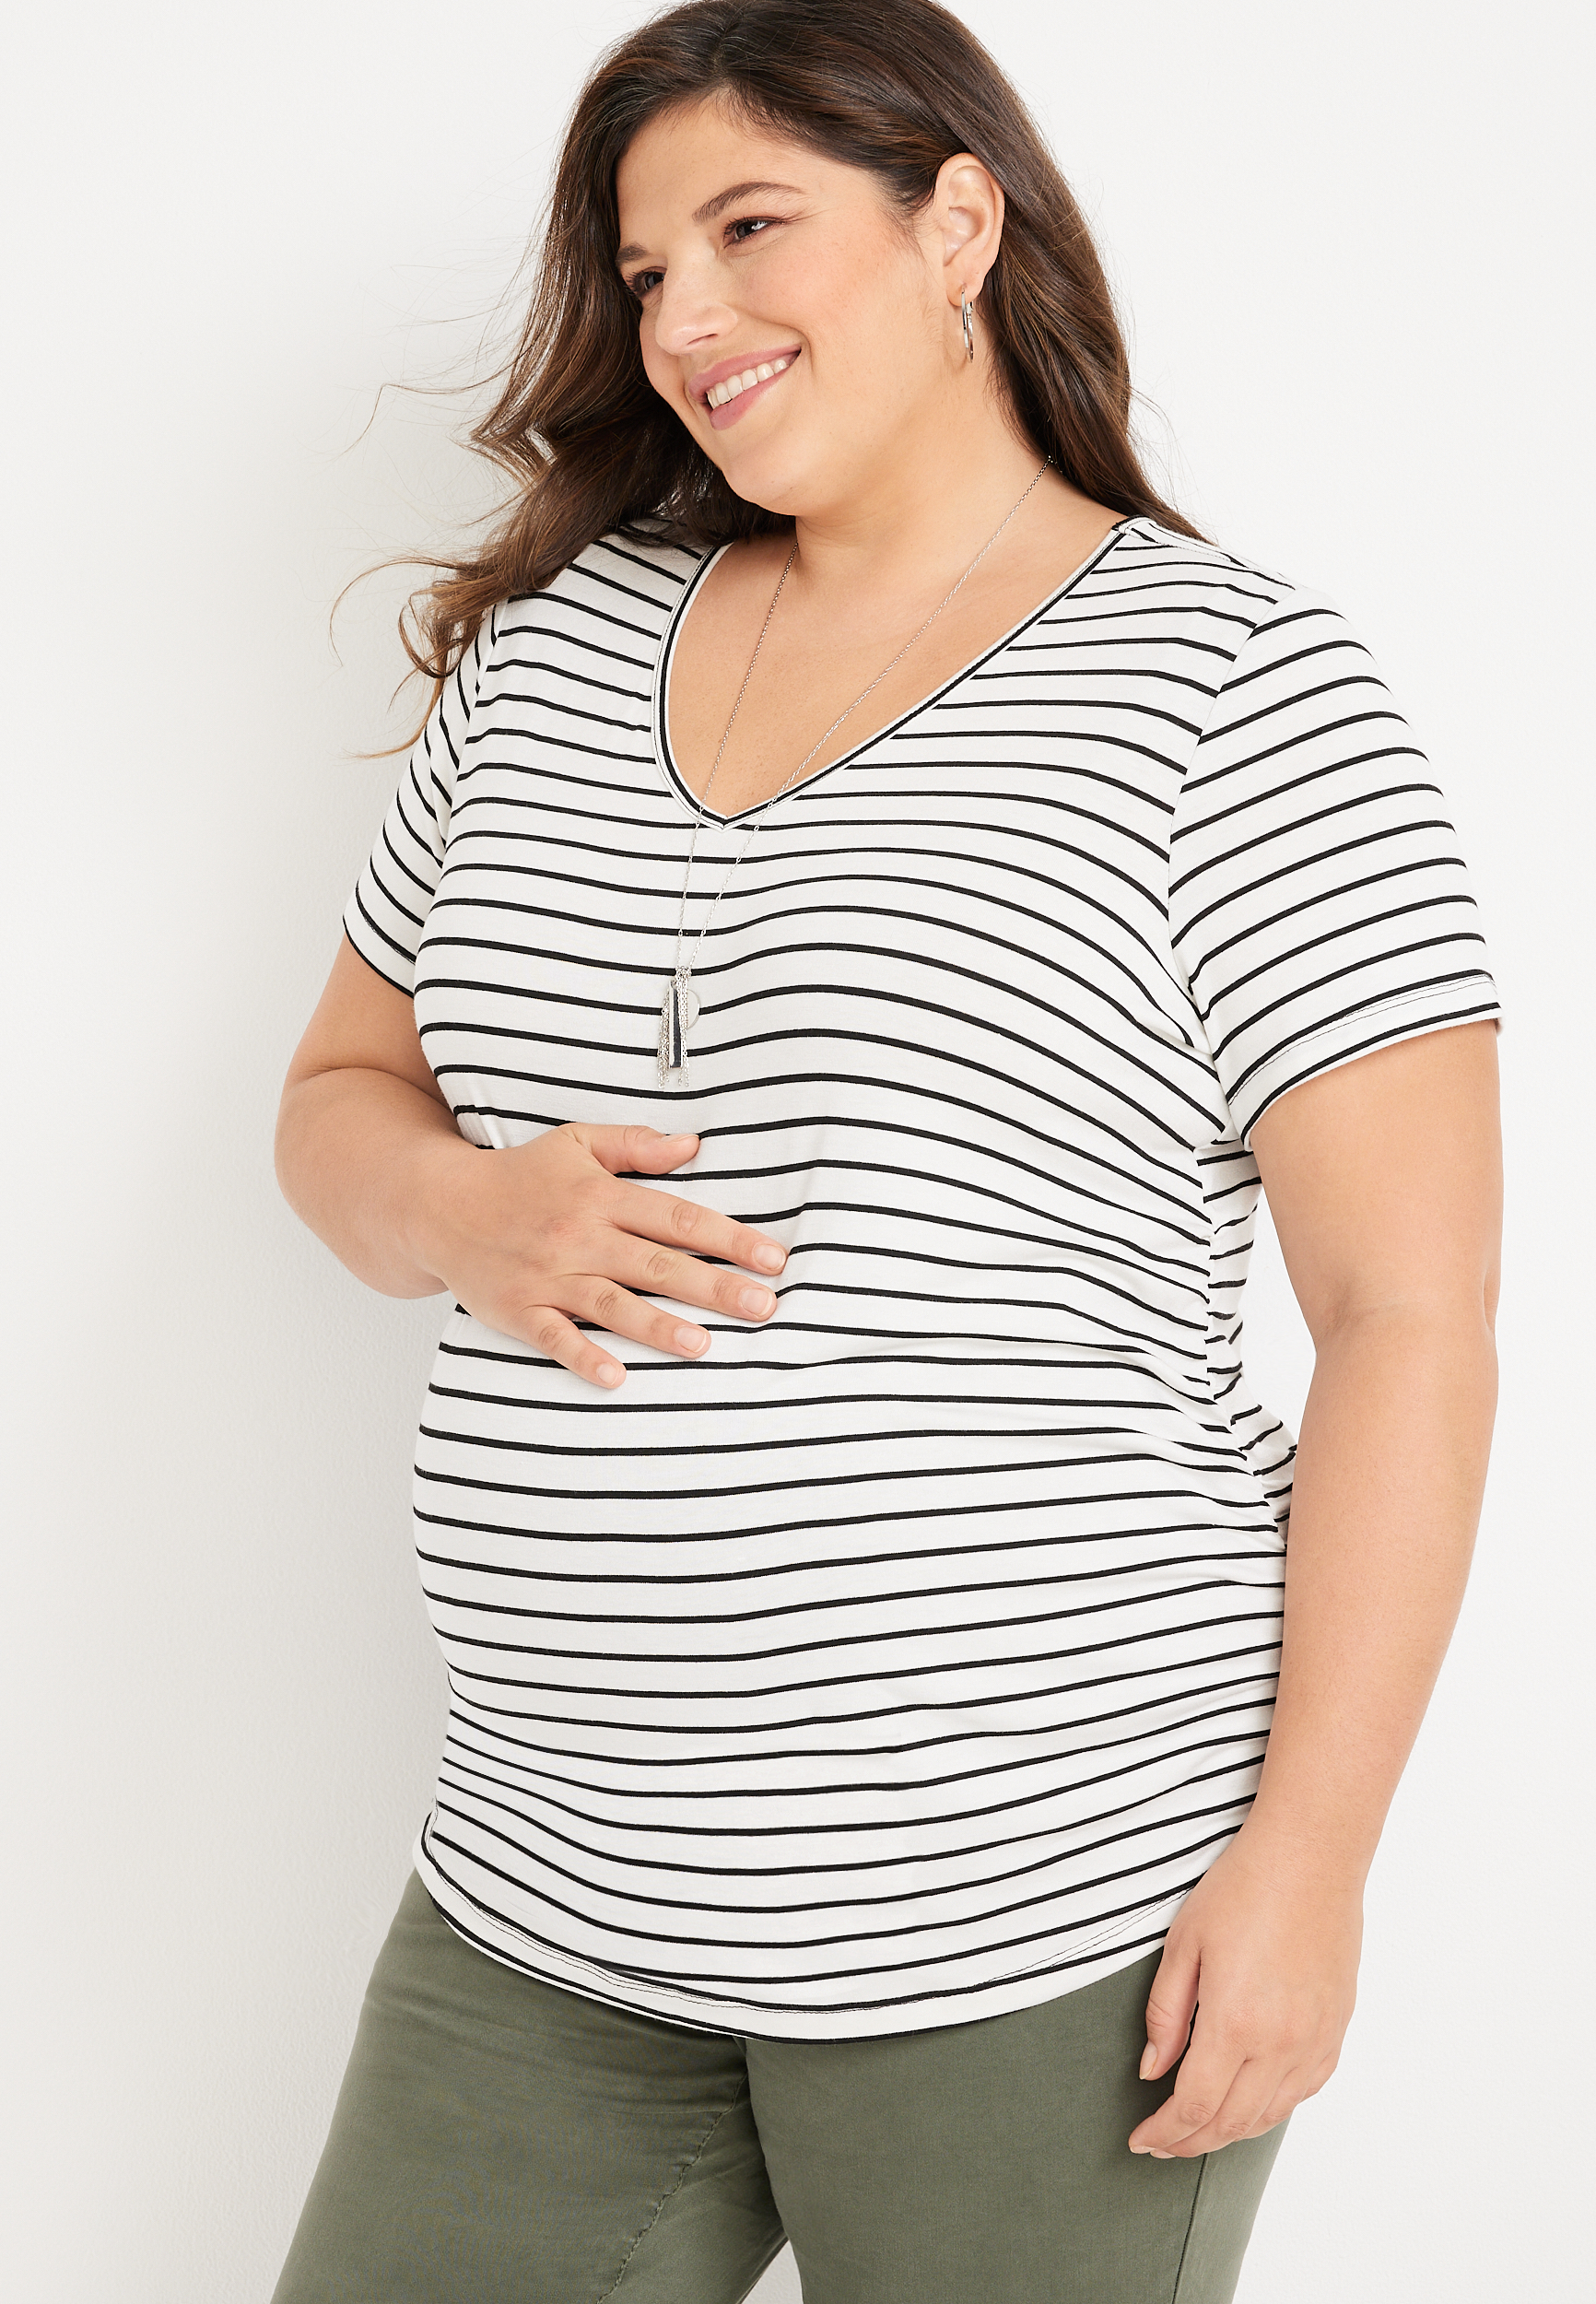 Size Maternity Clothes | Pregnancy Clothing | maurices